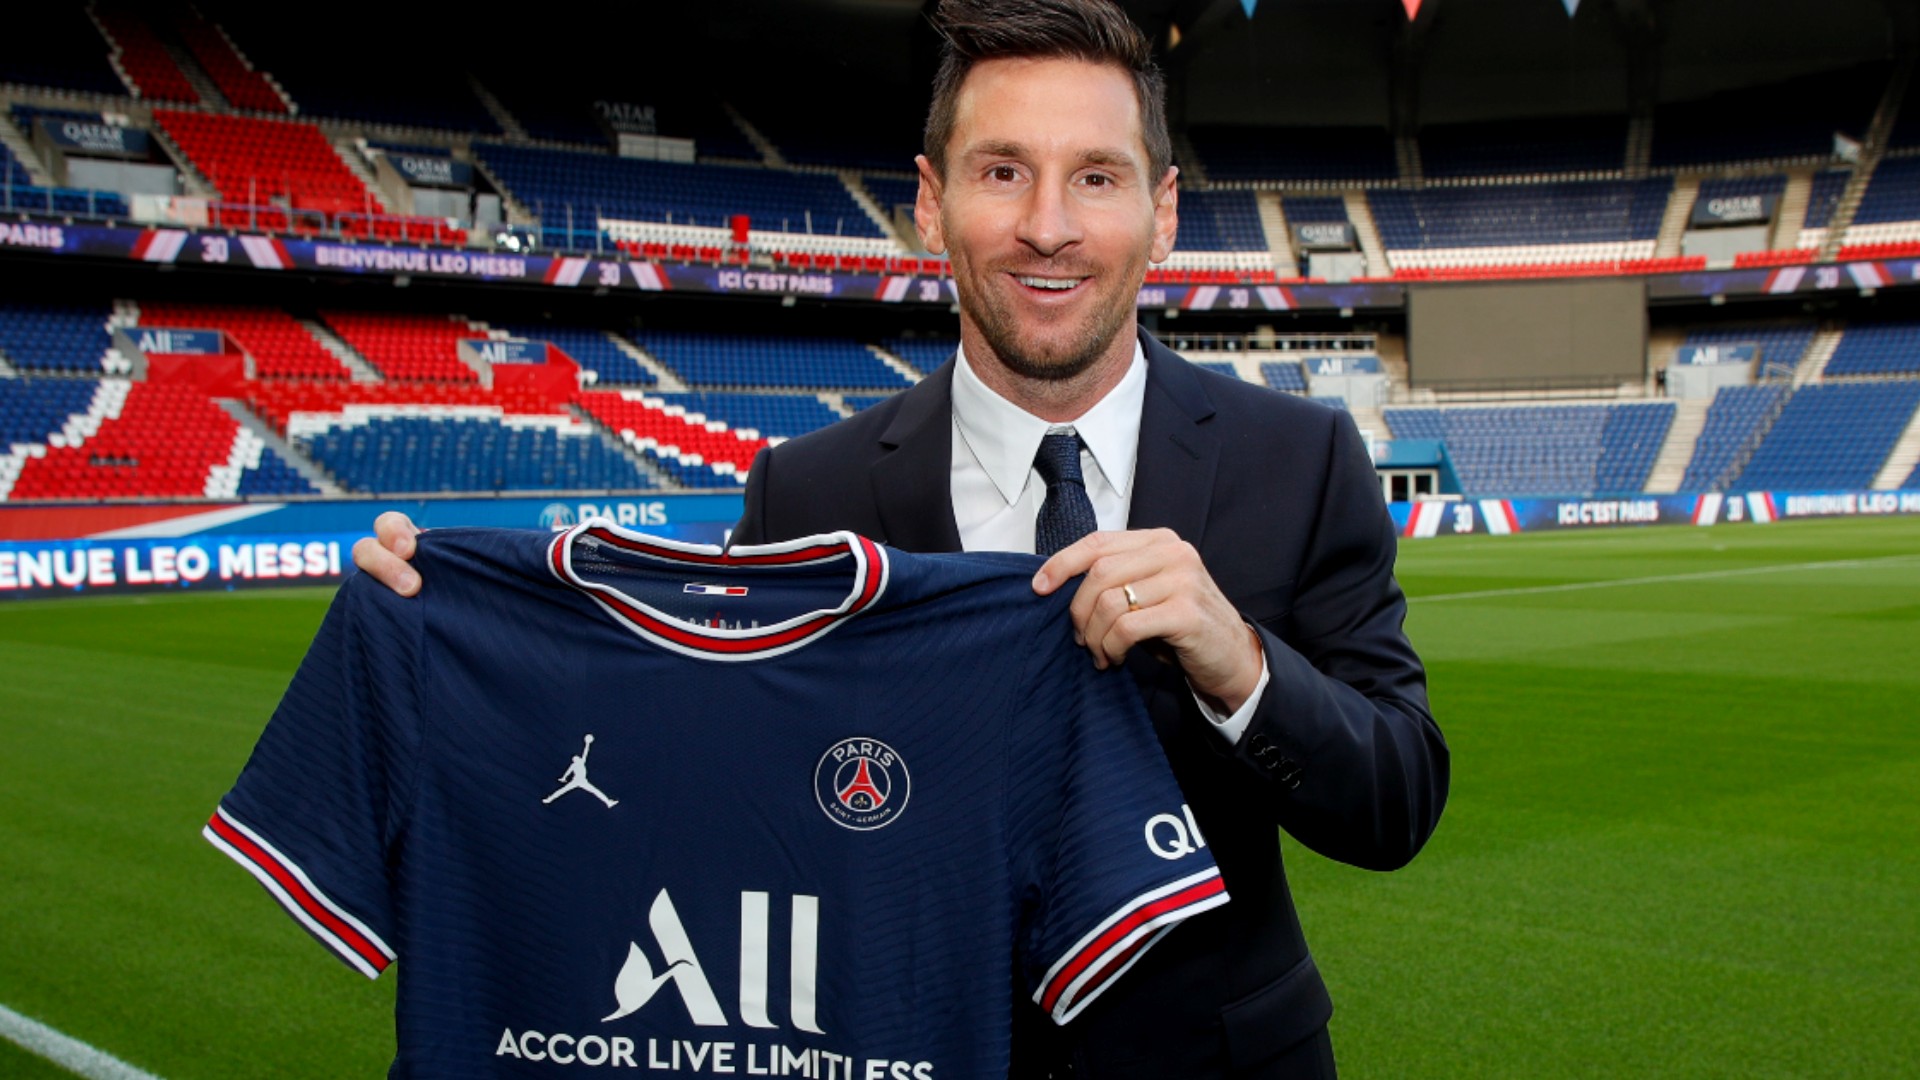 Lionel Messi Officially Completes Move to Paris Saint-Germain